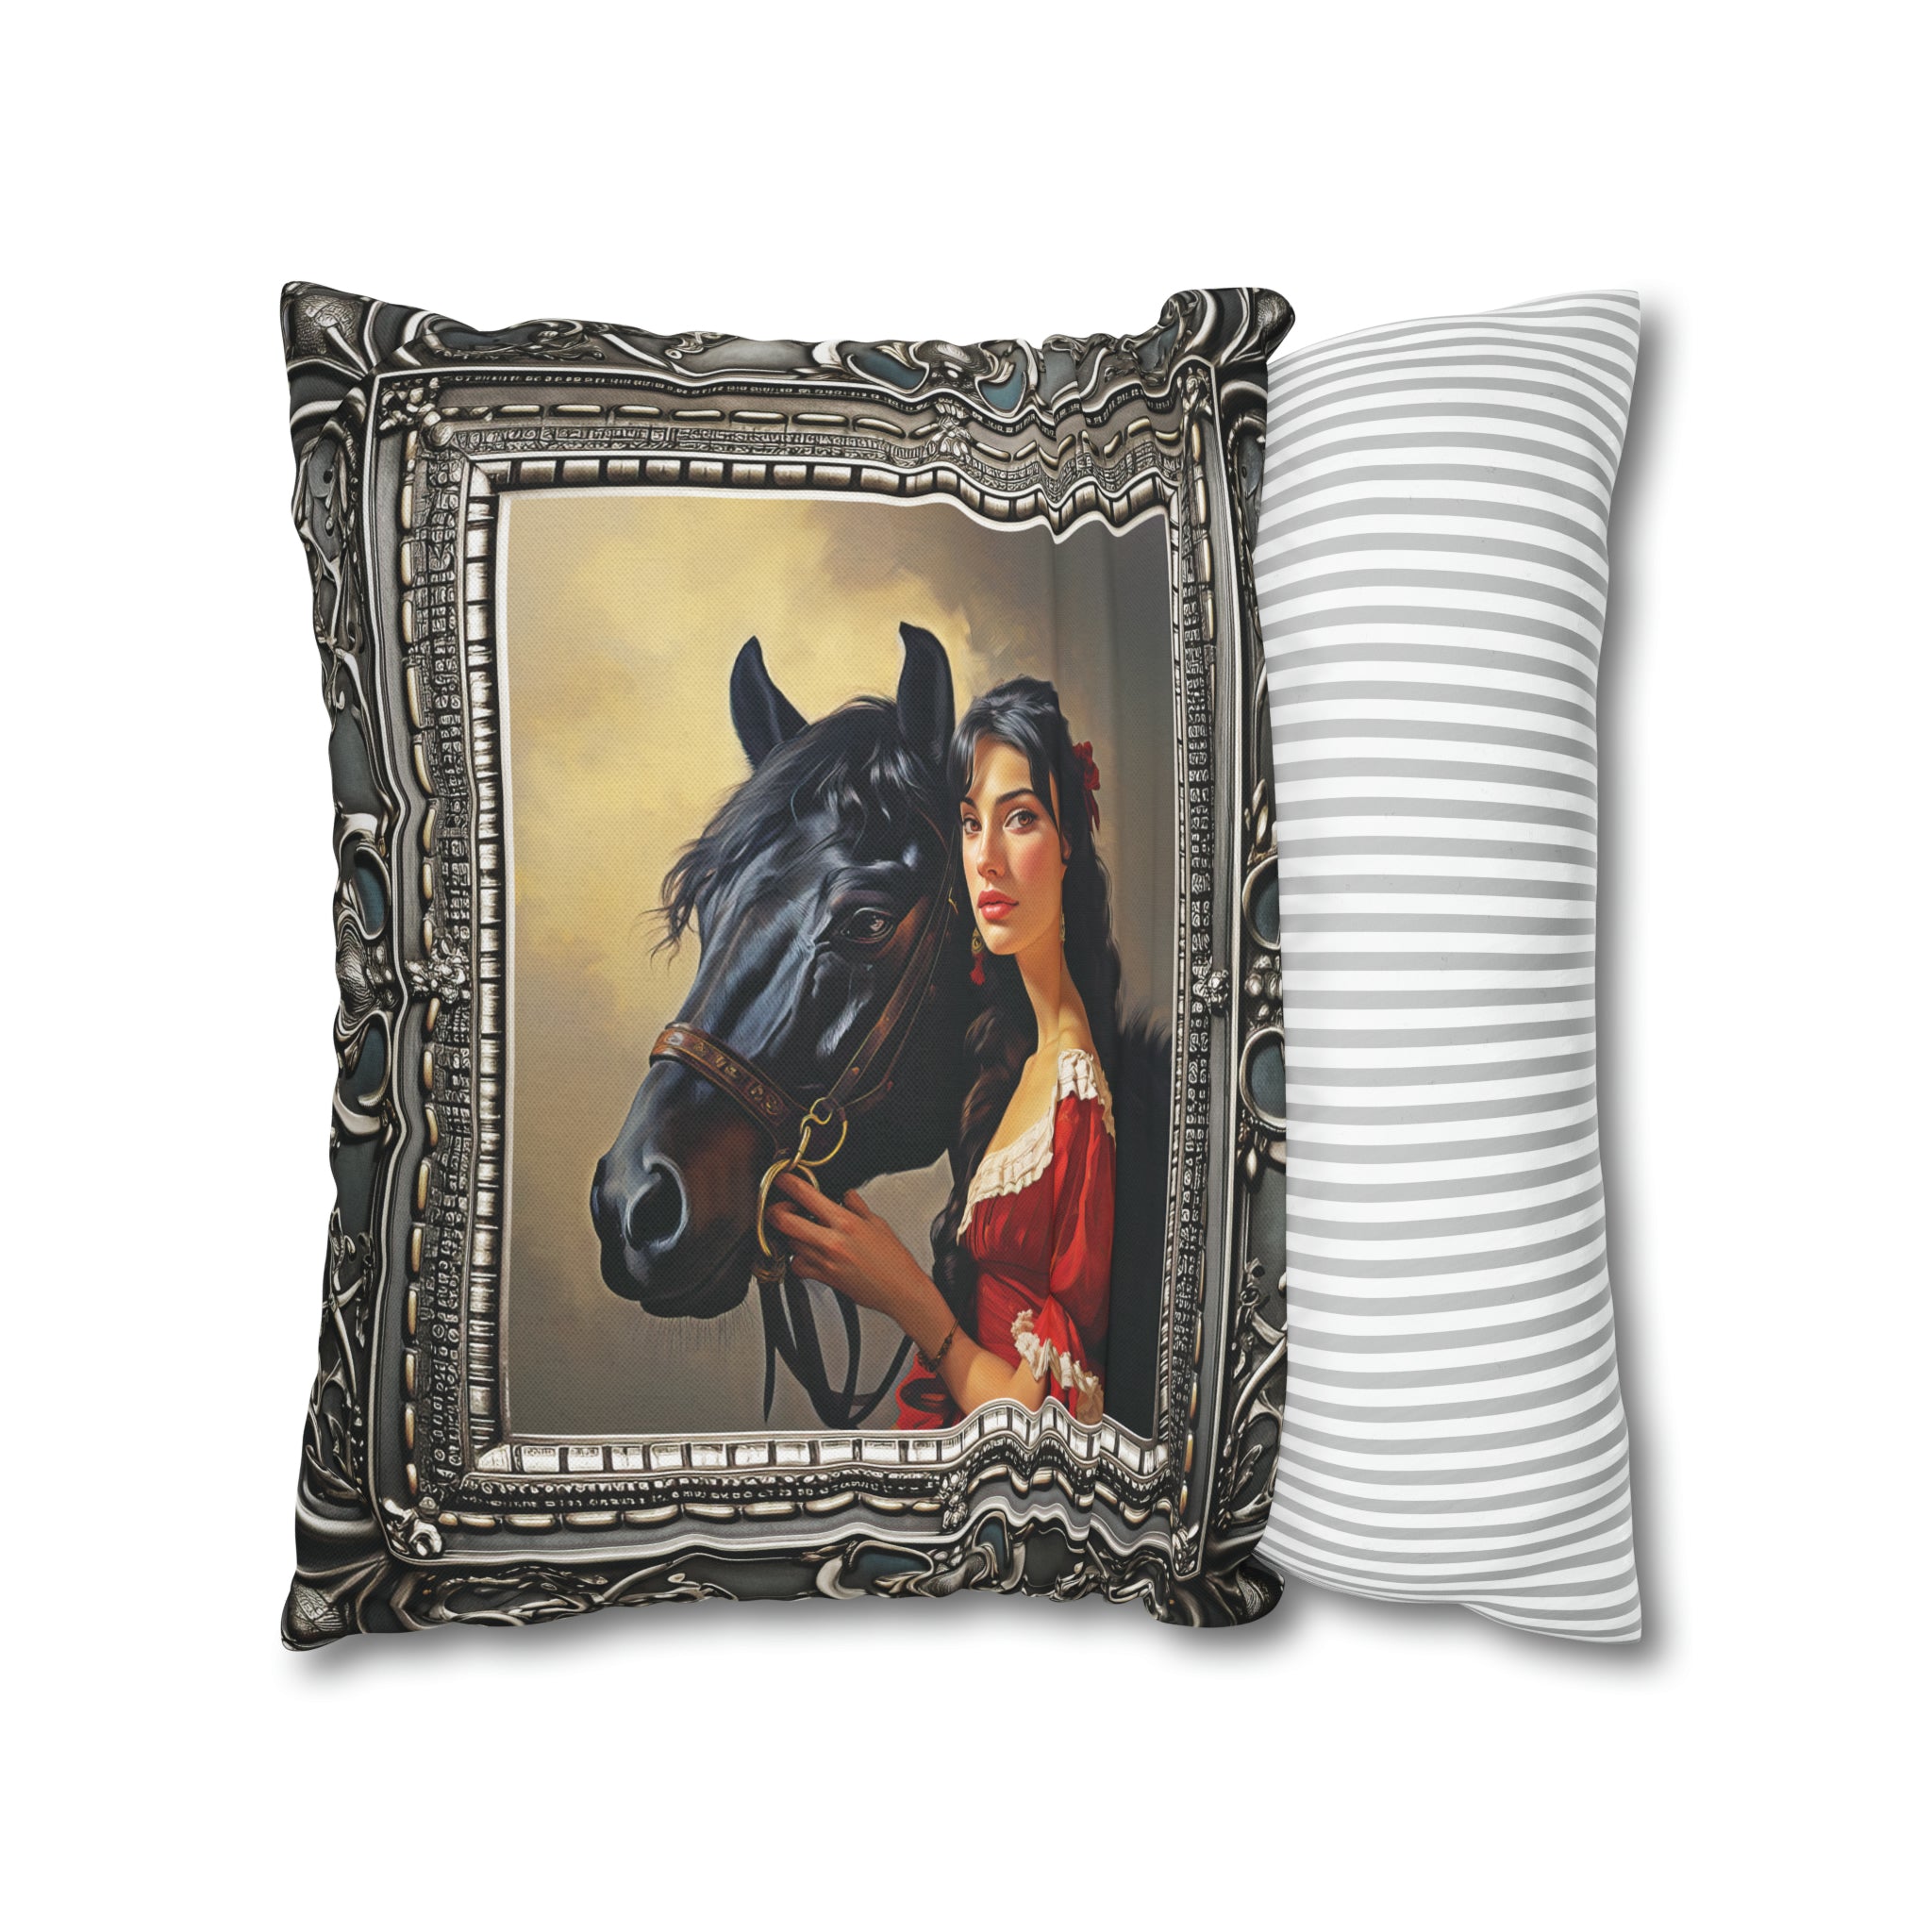 Square Pillow Case 18" x 18", CASE ONLY, no pillow form, original Art, A beautiful Painting of a Woman and Her Horse in an Antique Frame